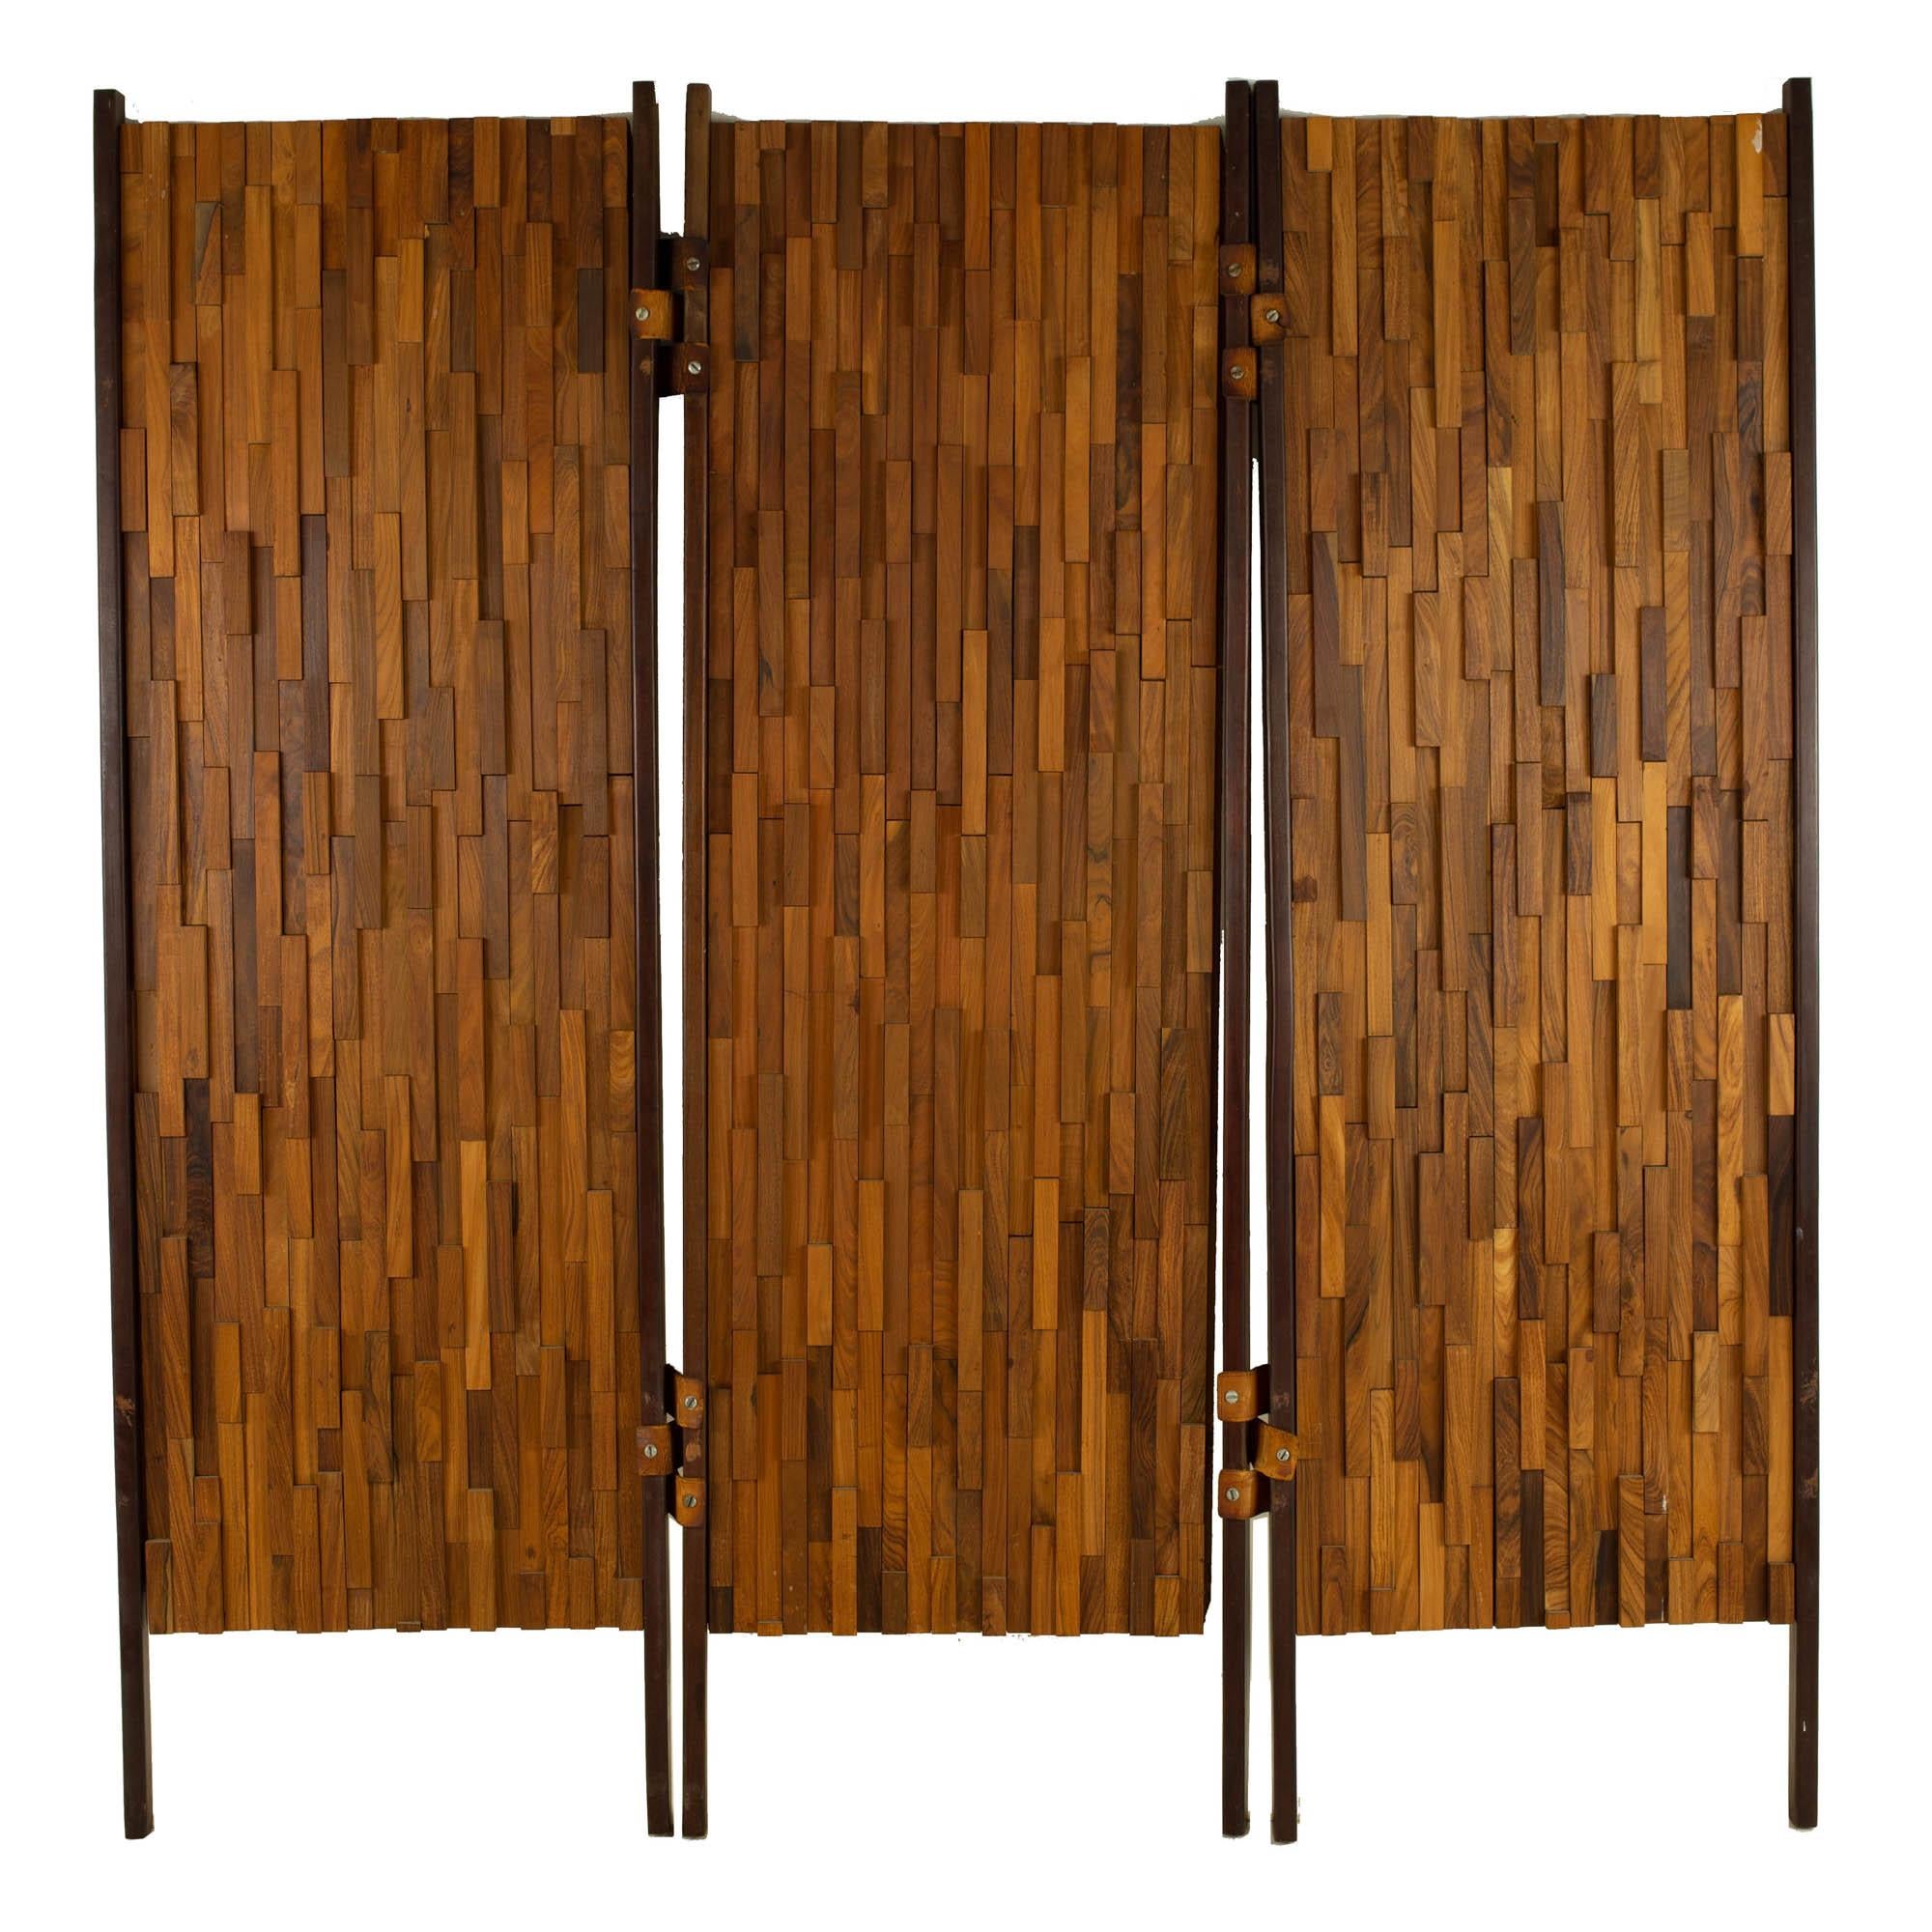 Percival Lafer mid century Brazilian rosewood and leather room divider

This room divider measures: 21.5 wide x 1.5 deep x 68.25 inches high

?All pieces of furniture can be had in what we call restored vintage condition. That means the piece is